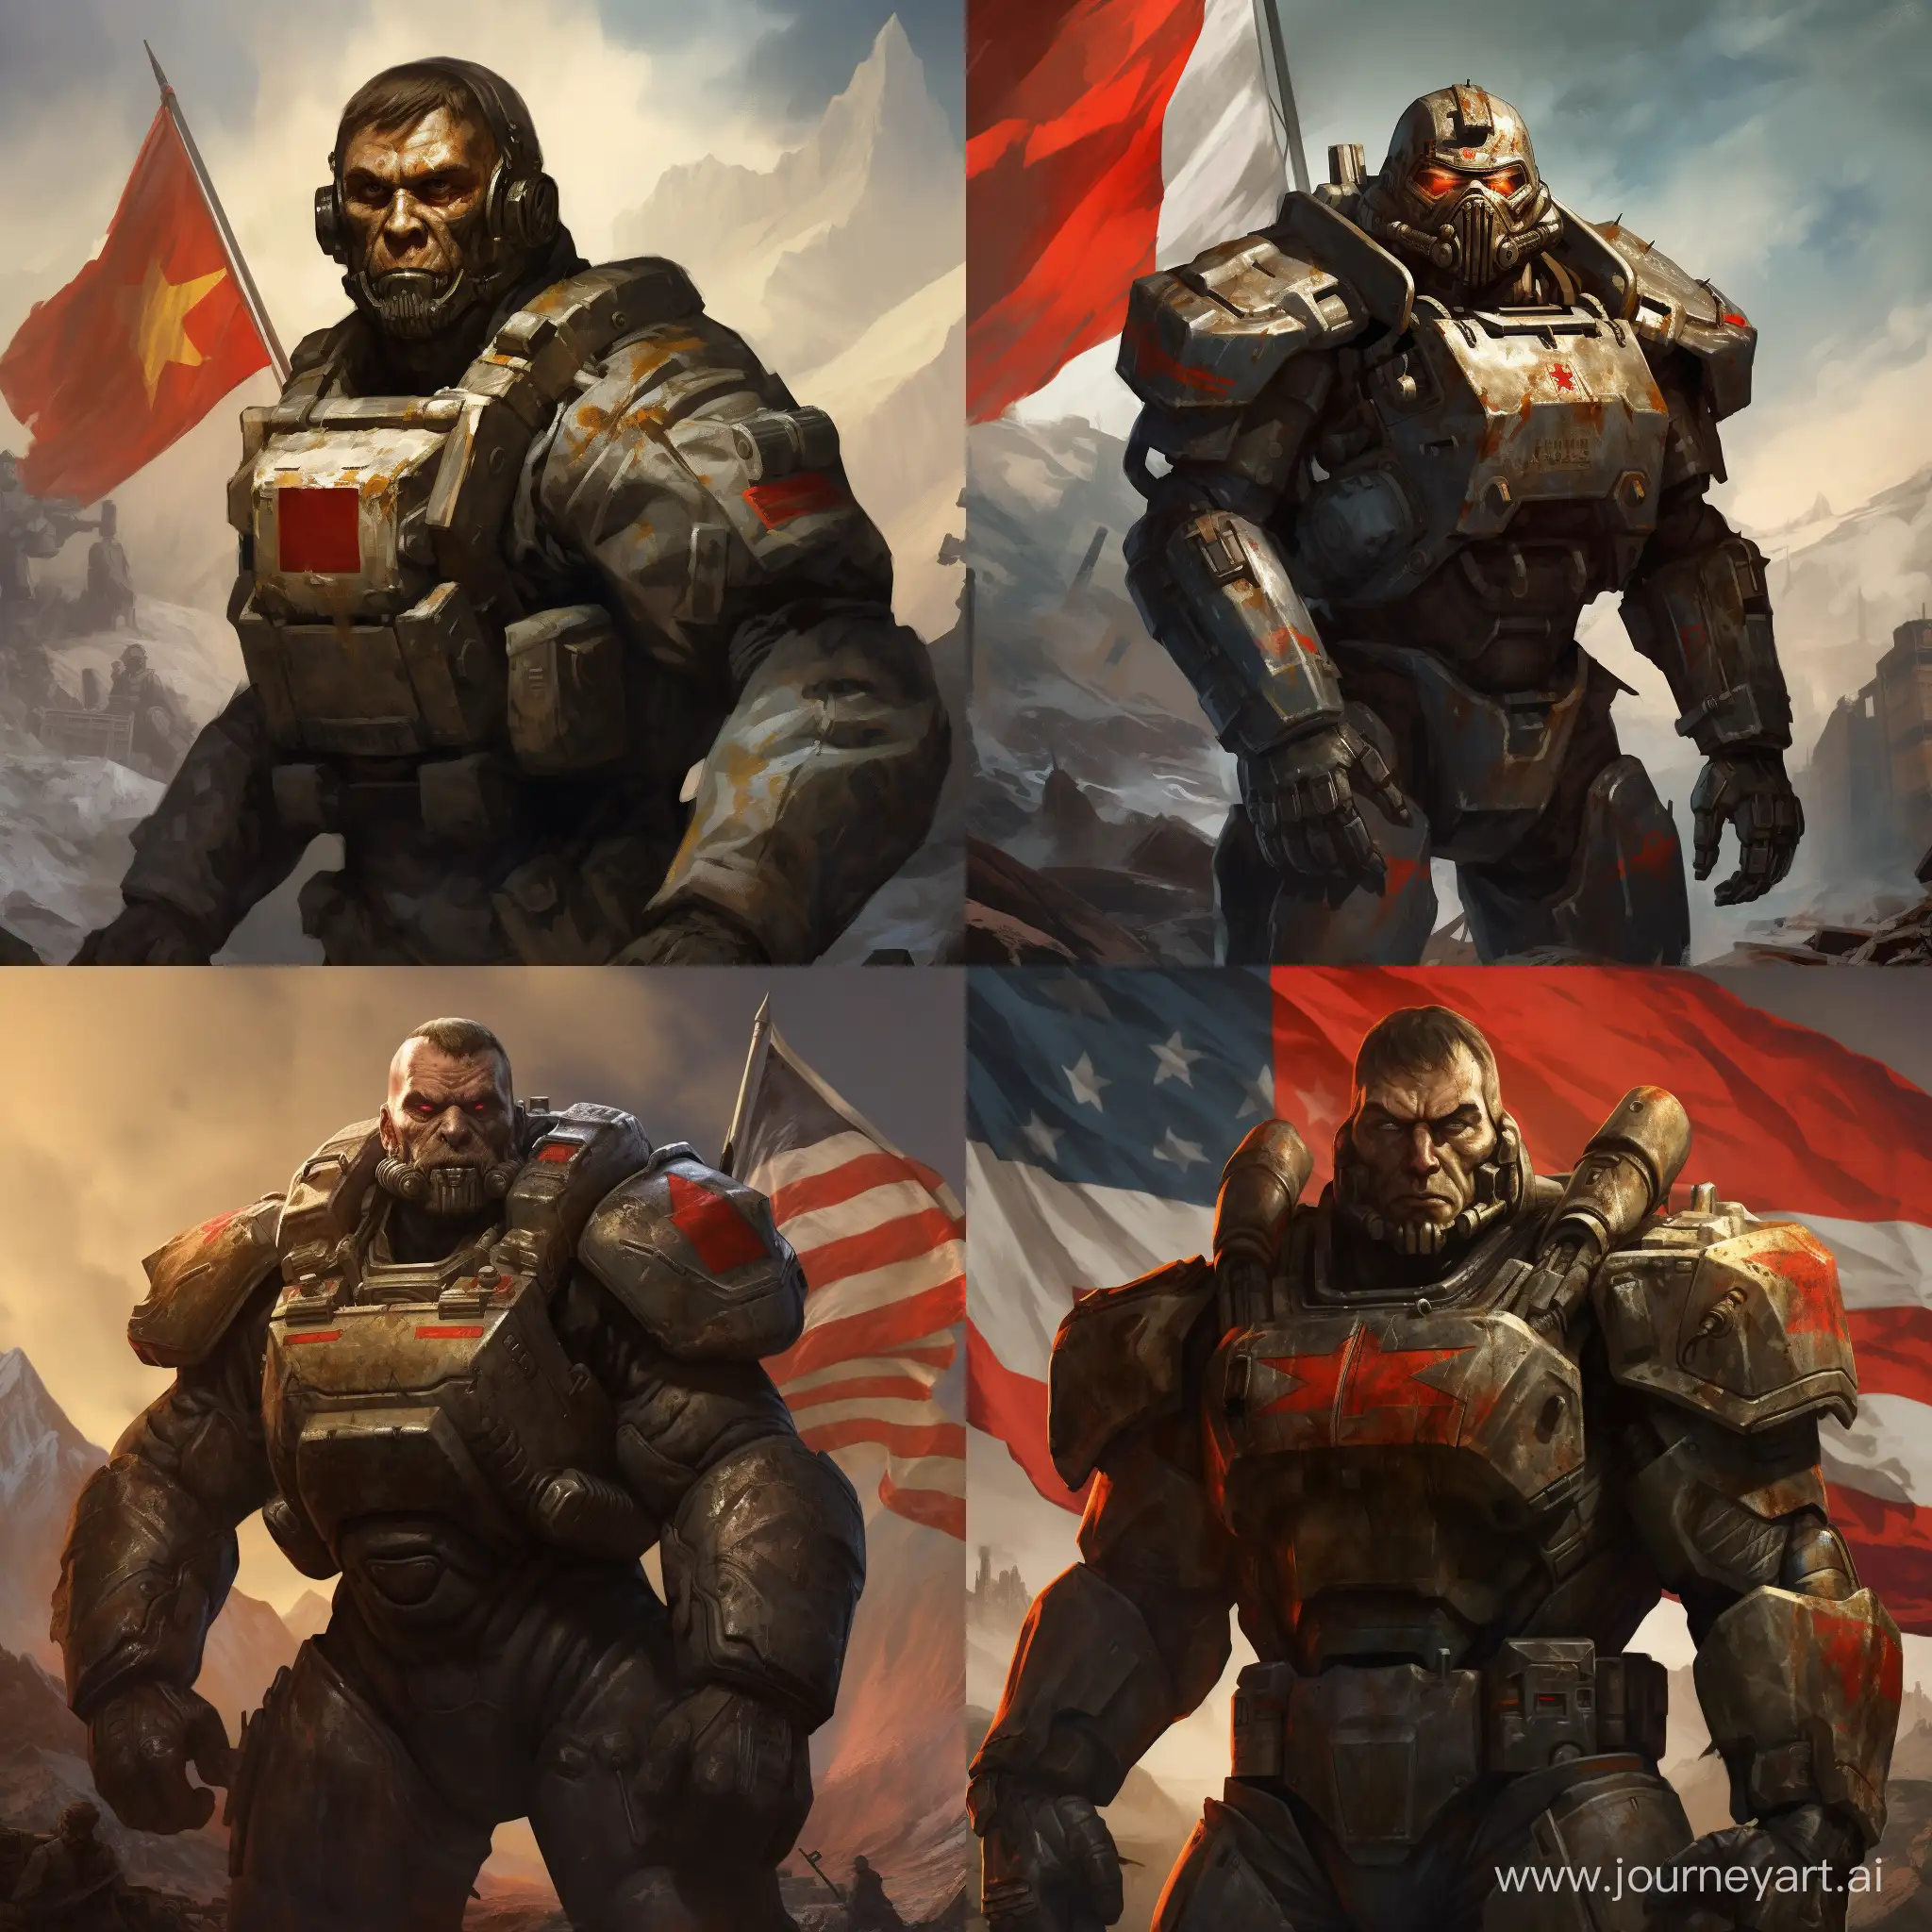 Frank Horrigan (fallout 2) against the background of the Russian flag